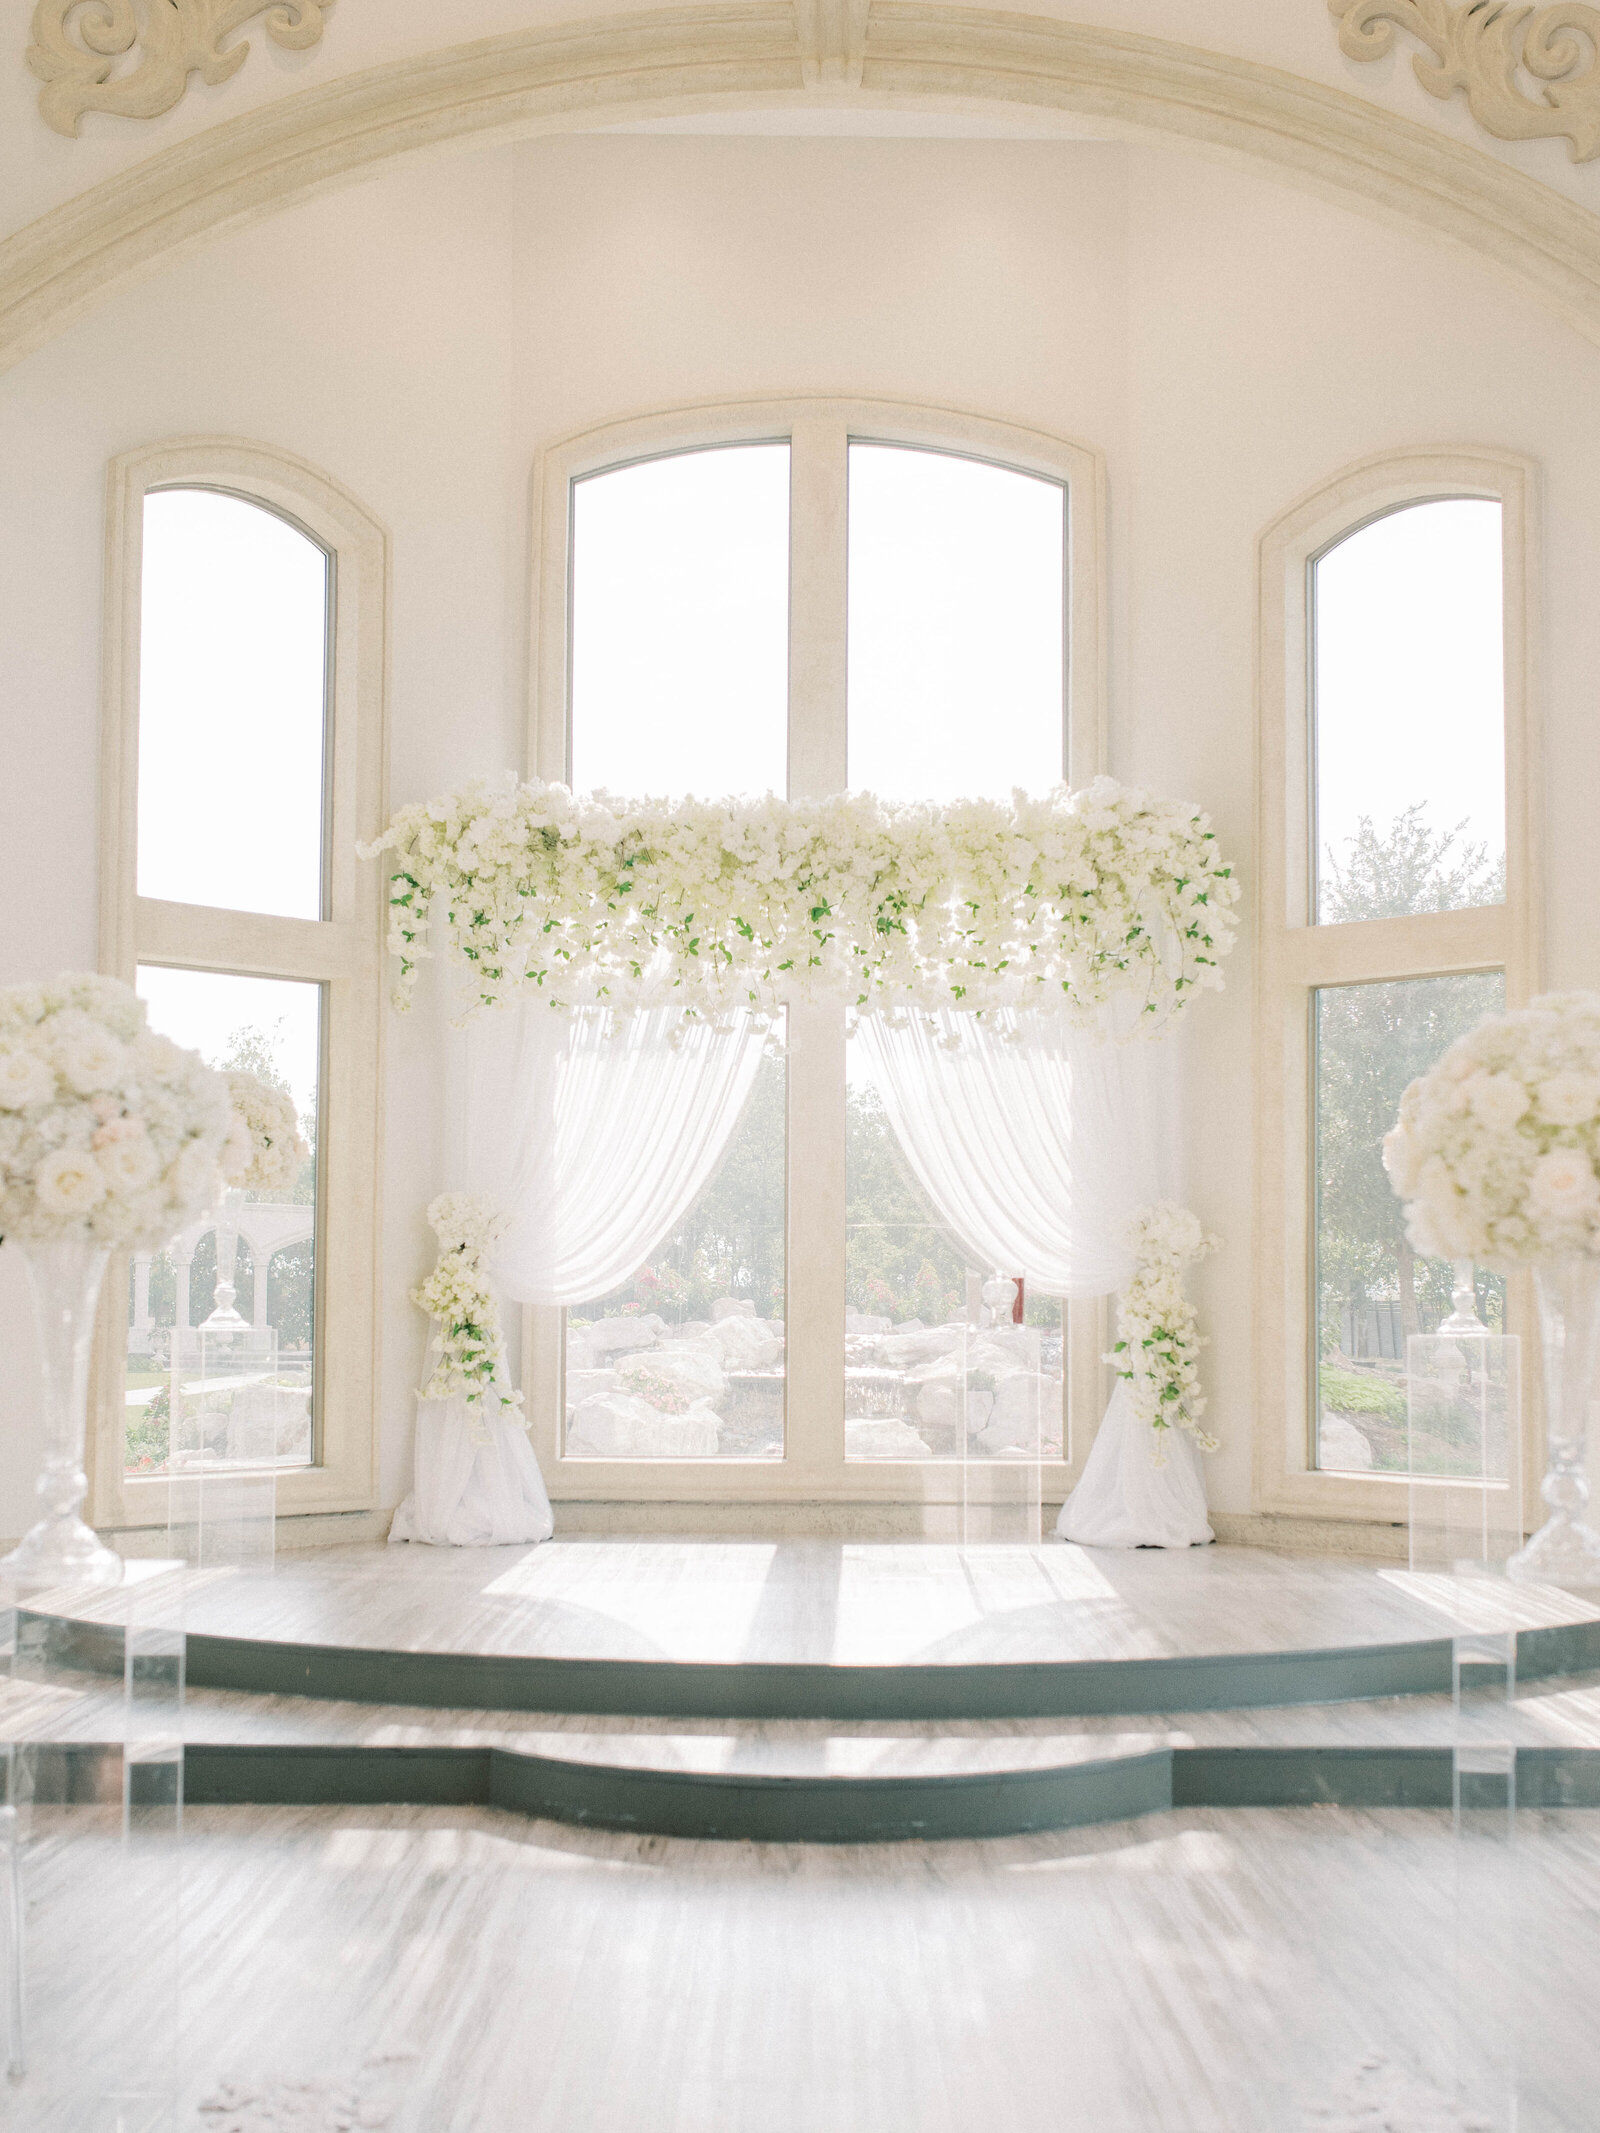 Grand church alter with white floral arrangements and white tapestries